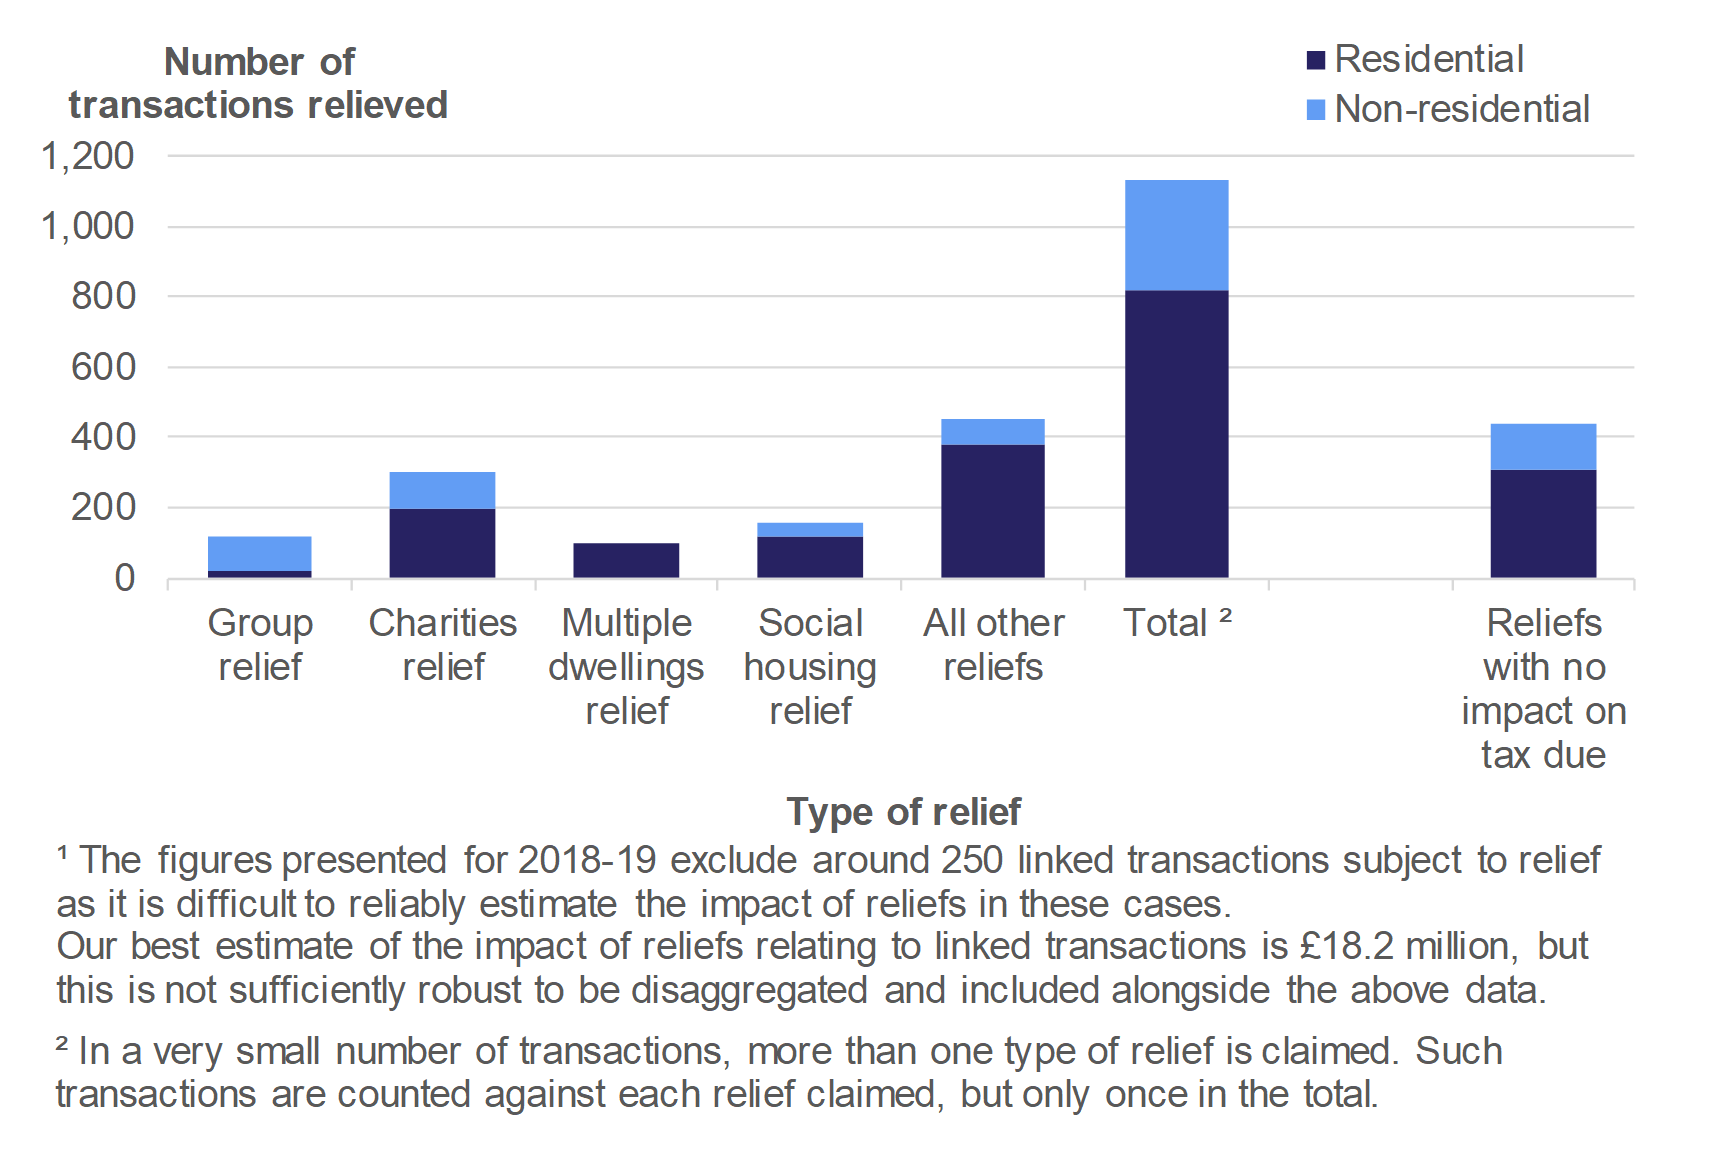 Figure 5.1 shows the number of reliefs applied to residential and non-residential transactions in April 2018 to March 2019, by type of relief. A separate figure is shown for the number of reliefs where the relief had no impact on the tax due.